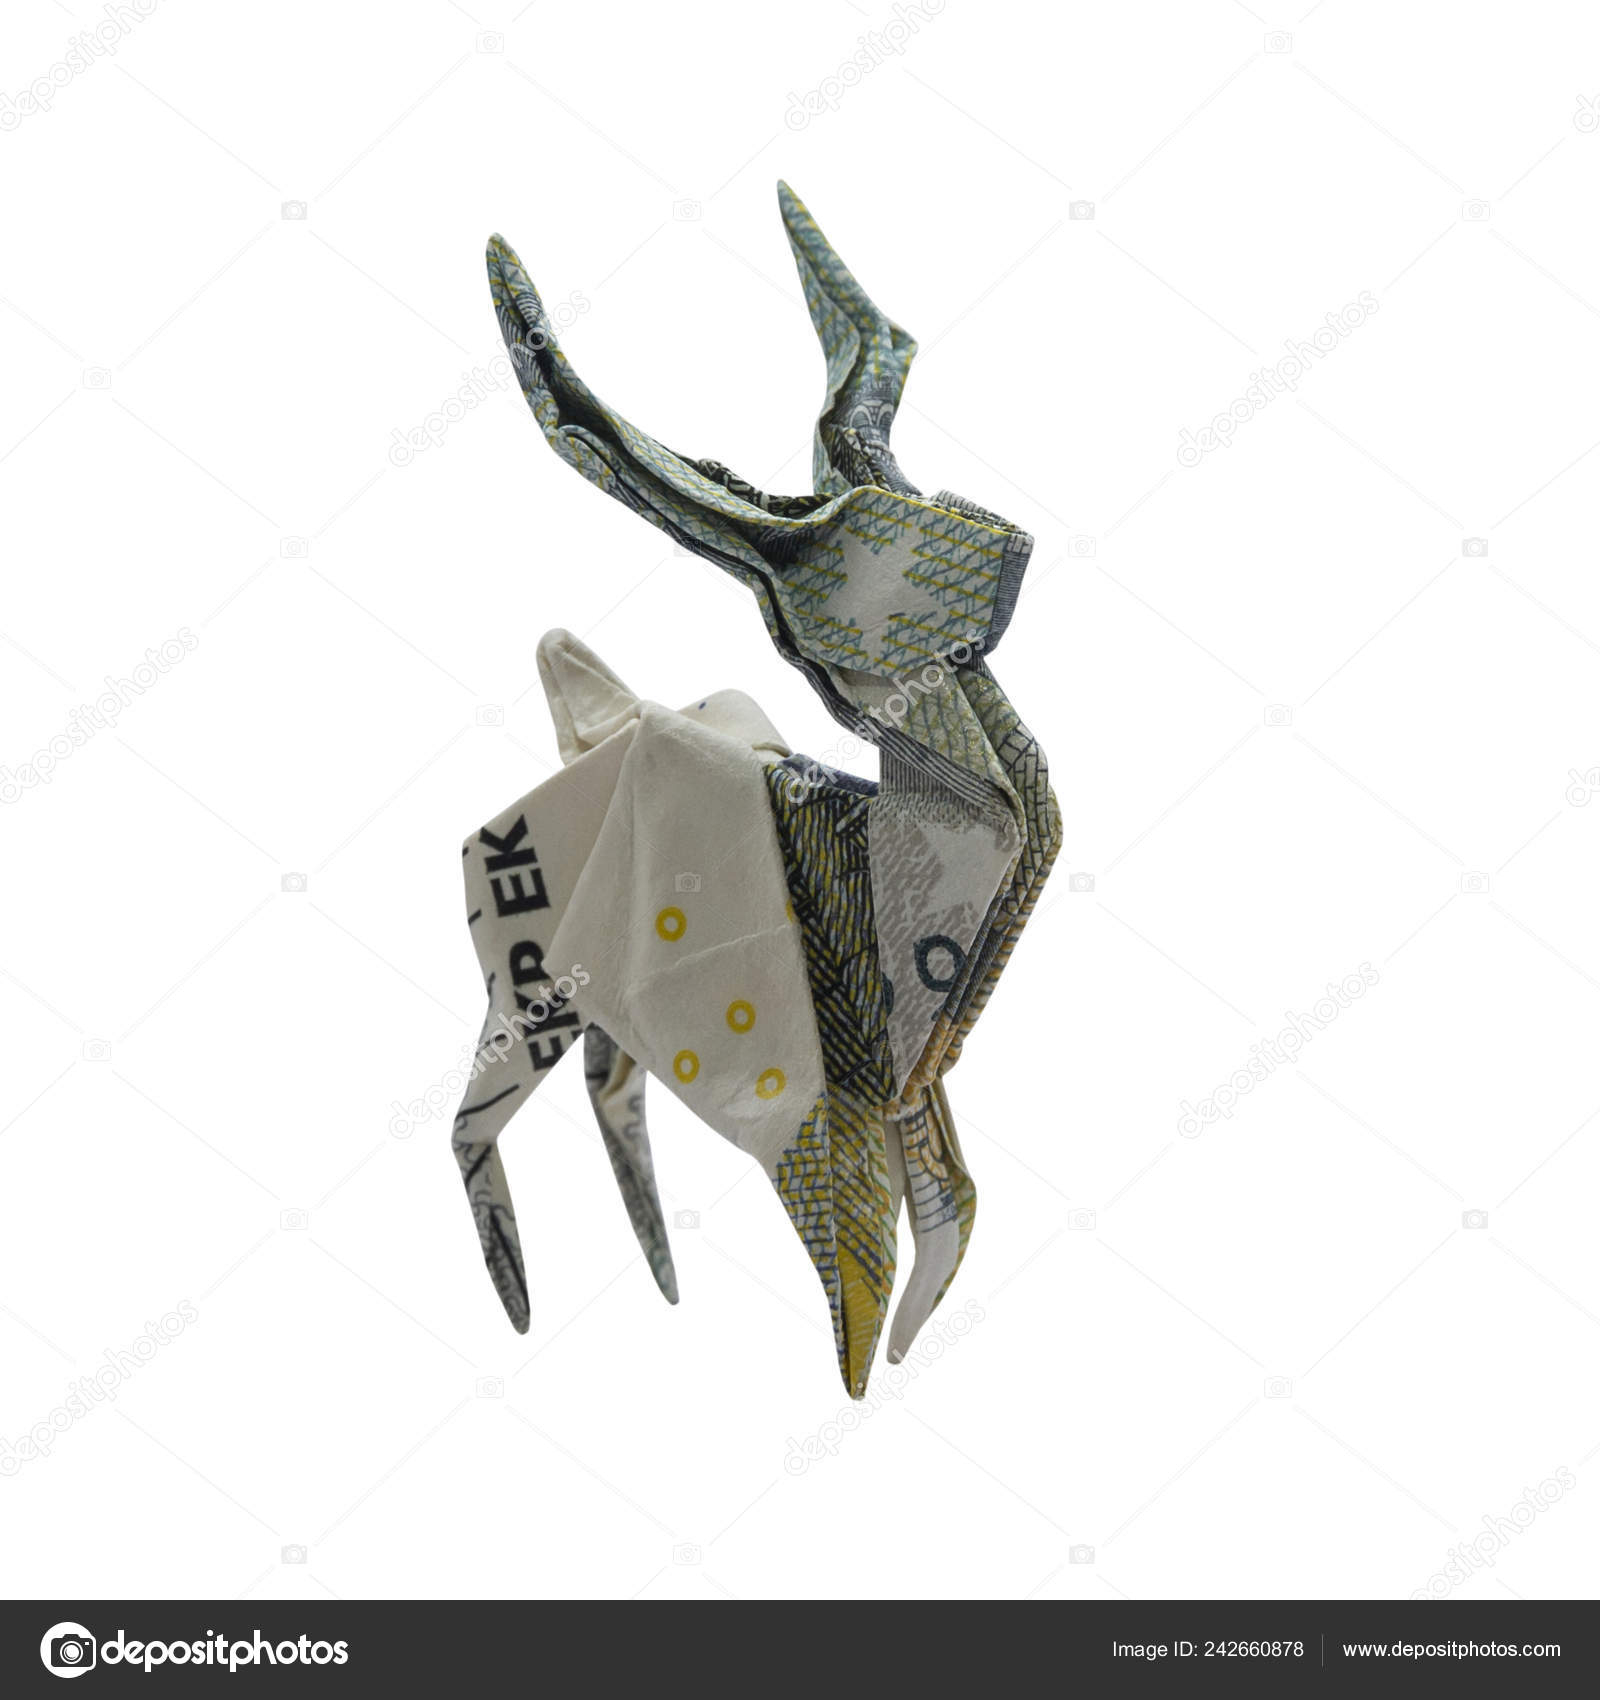 5 Note Origami Money Origami Ba Deer Wild Stag Animal Folded Real Euro Stock